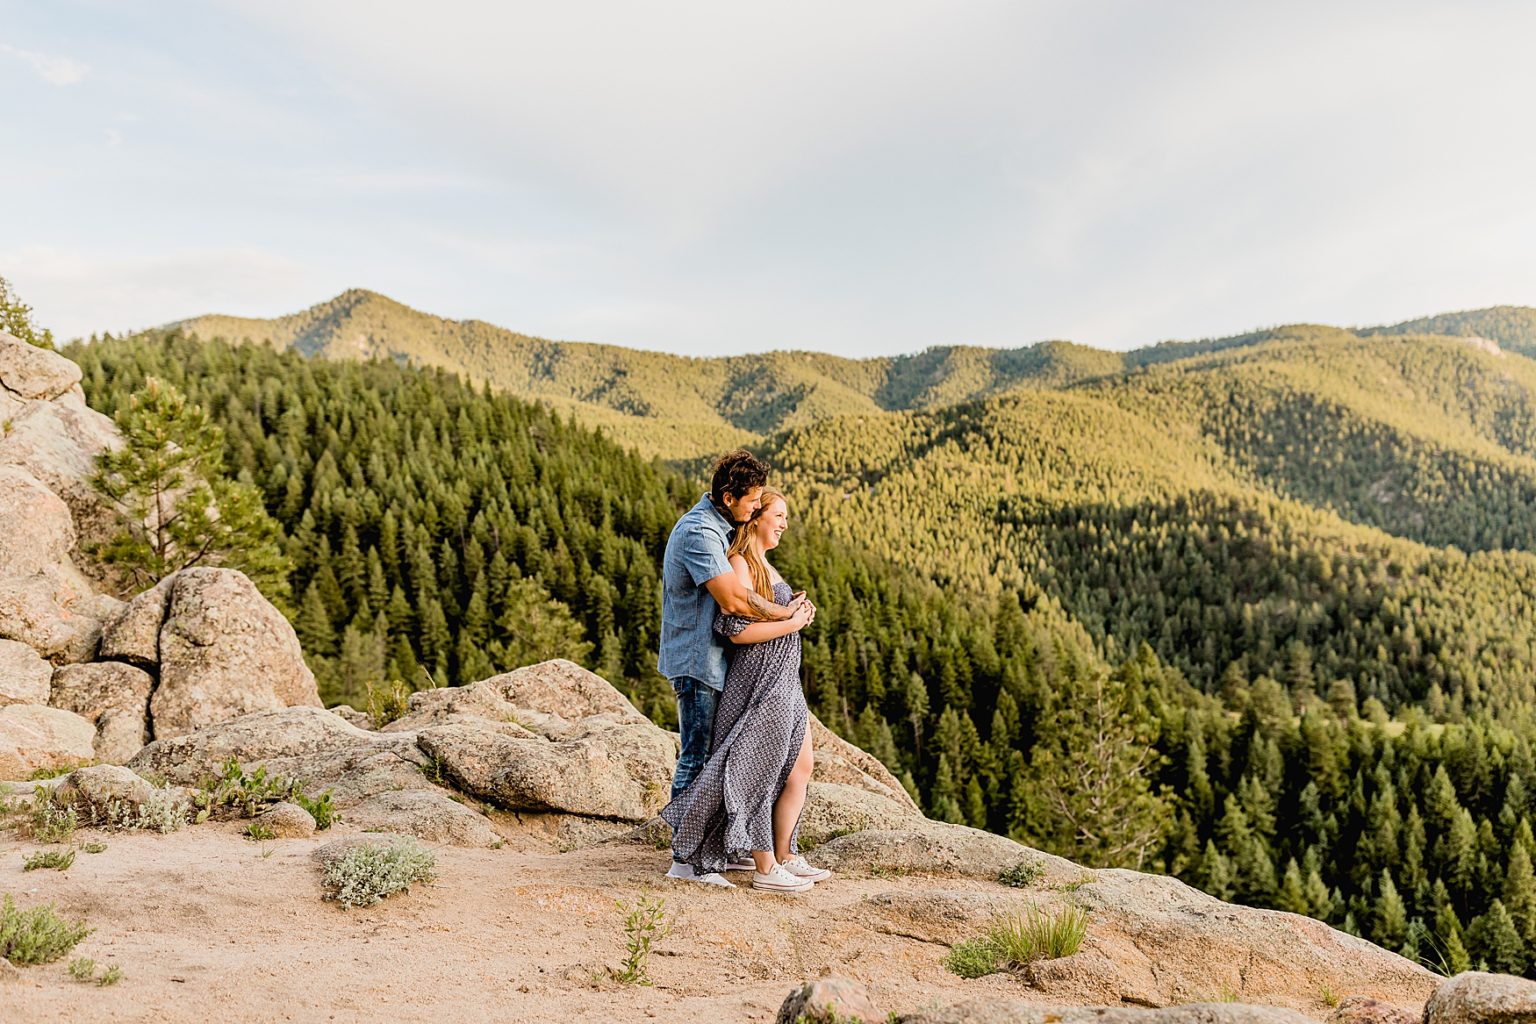 man hugs woman and they look out at the wonderful mountain scenery surrounding them